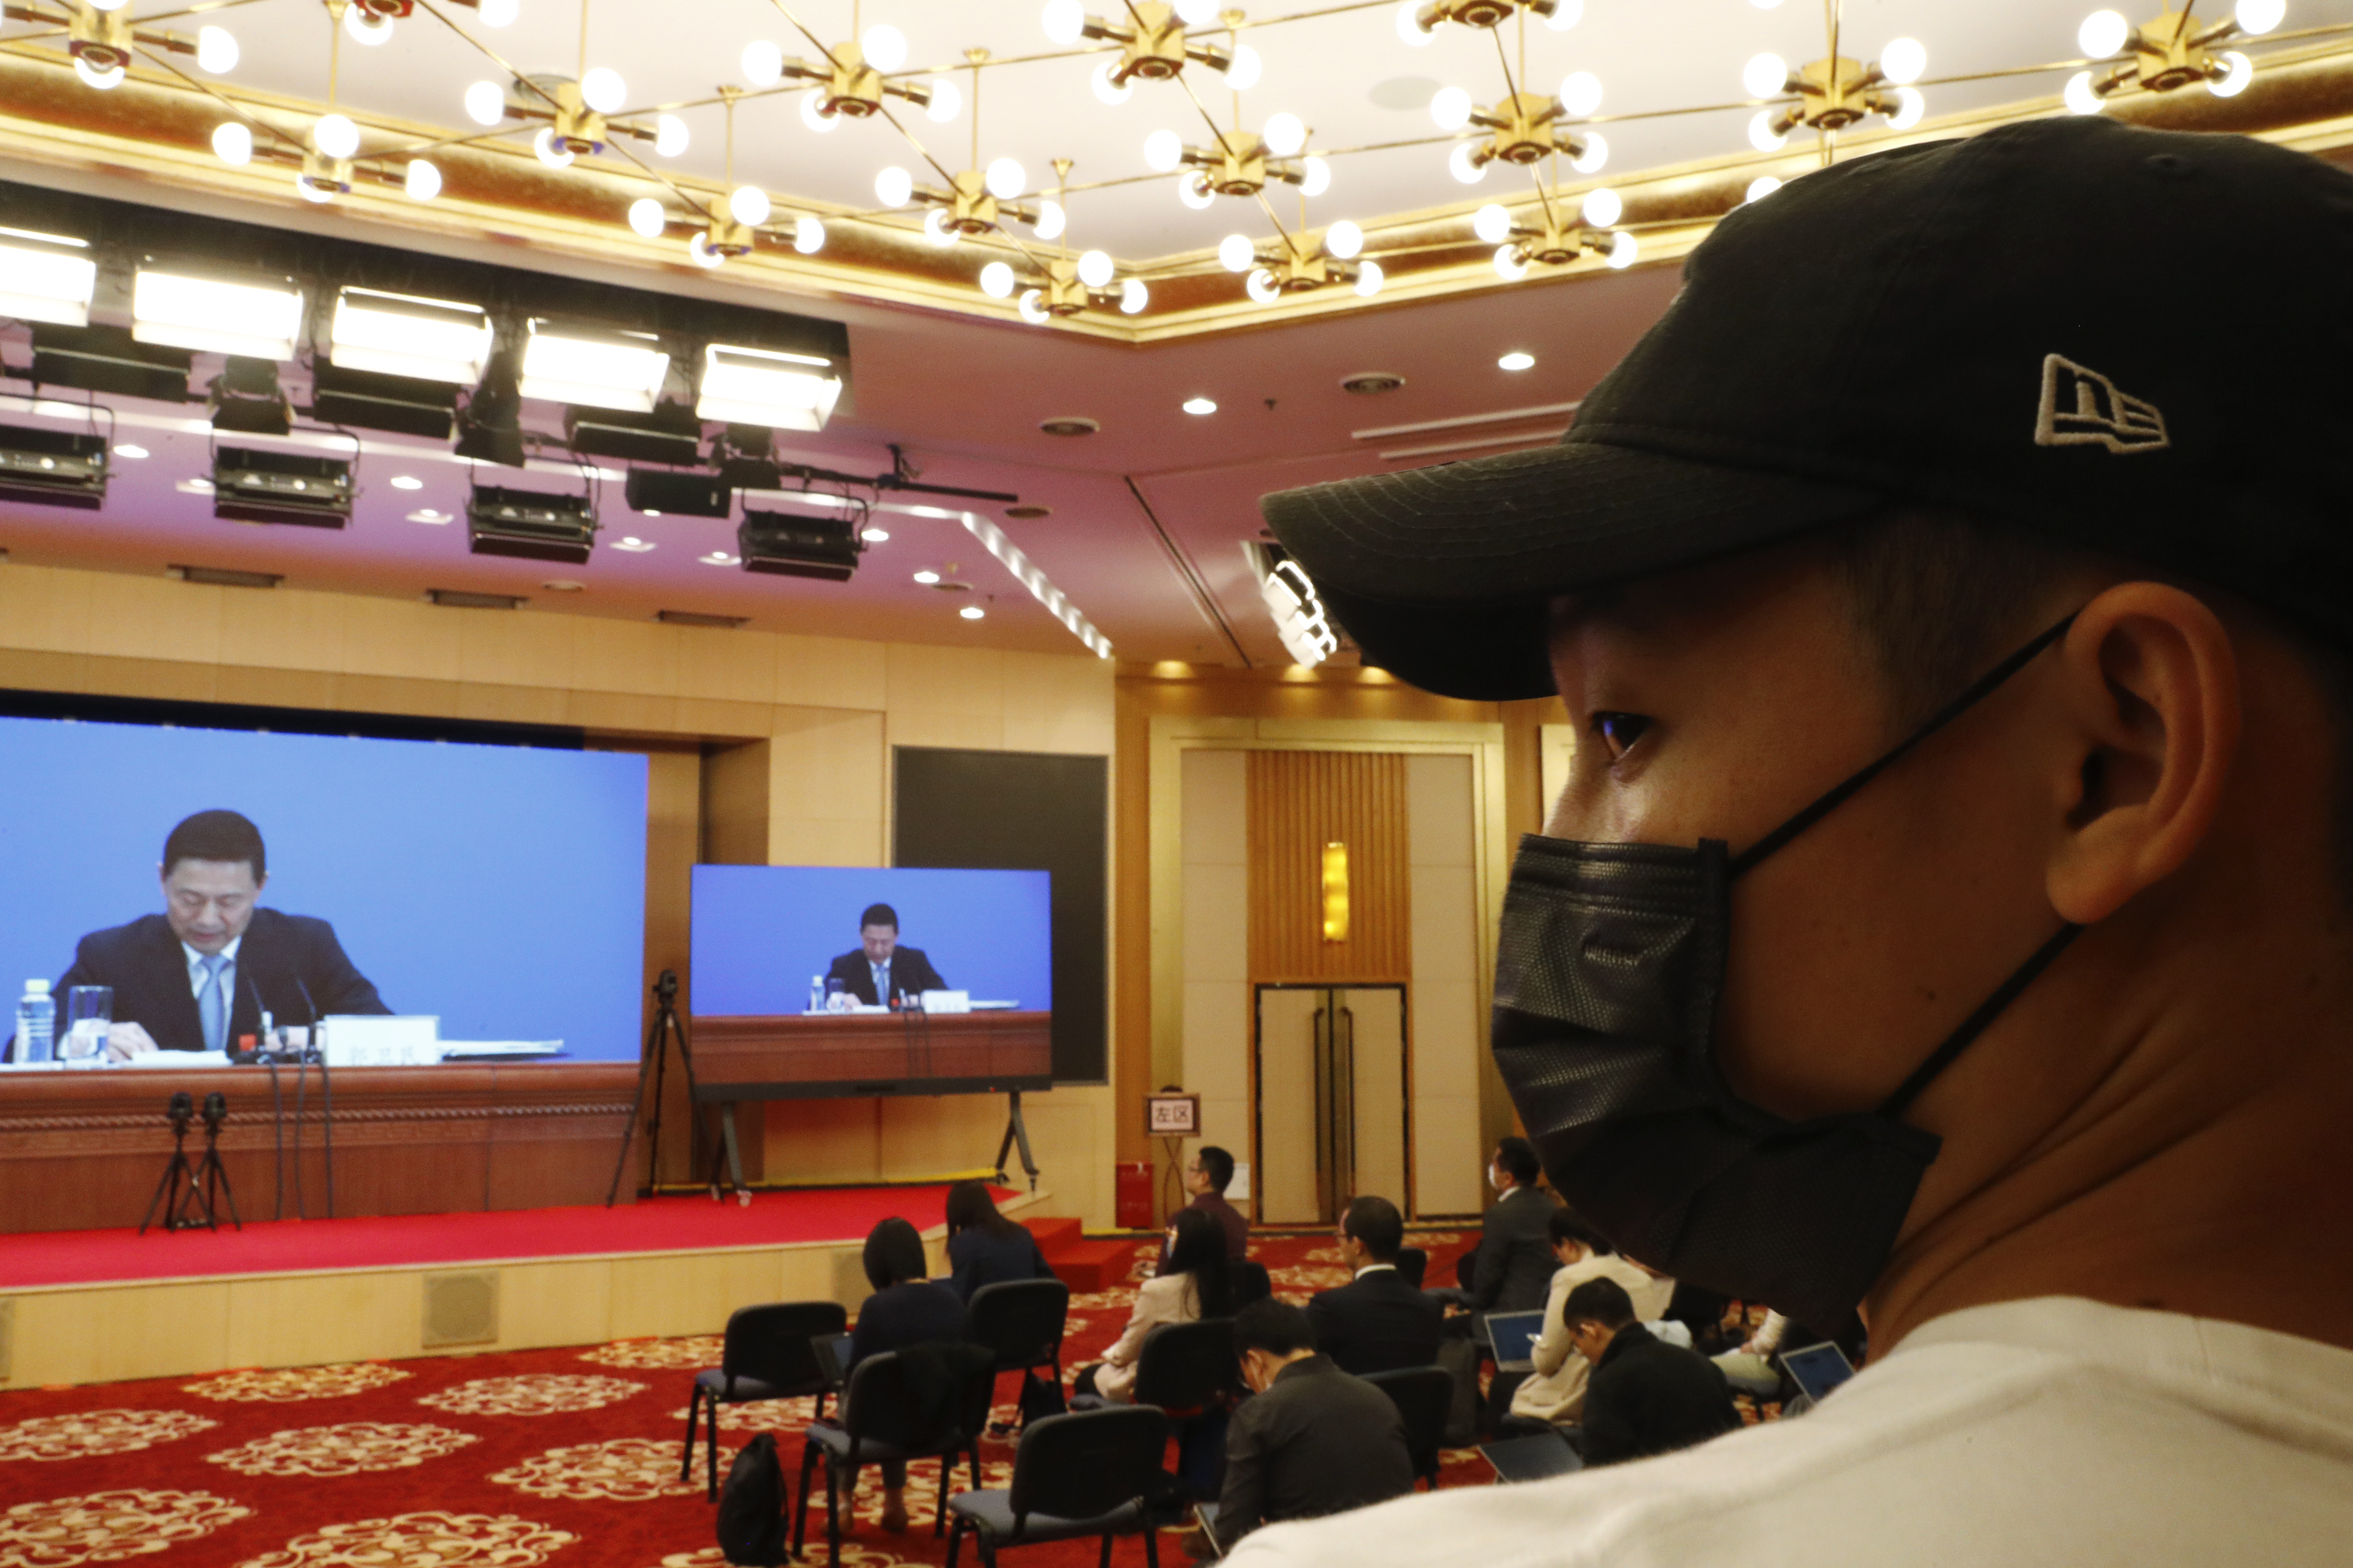 A journalist wearing a face mask following the coronavirus outbreak attends a news conference by Guo Weimin, spokesman for the National Committee of the Chinese People's Political Consultative Conference (CPPCC), broadcasted at a media center in Beijing, China Wednesday, May 20, 2020. This year’s version of the National People’s Congress — China’s biggest political meeting of the year — will be unlike any other. Delayed from March because of the then-spiraling coronavirus outbreak, the decision to go ahead with the annual gathering starting Friday signals a partial return to normalcy in the country where the pandemic first broke out. (Thomas Peter/Pool Photo via AP)